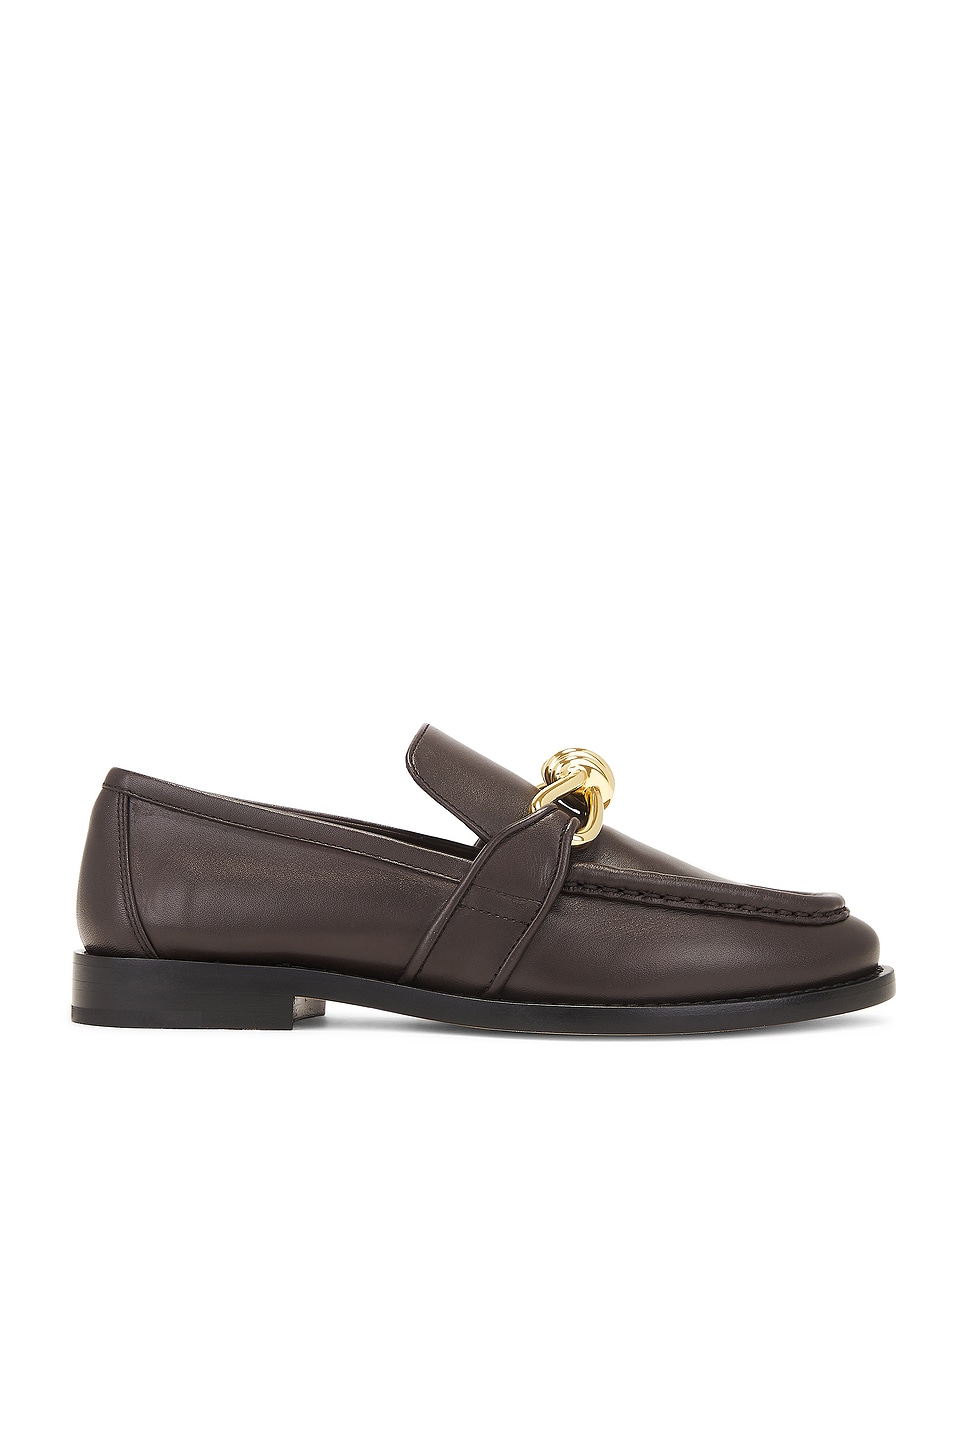 Astaire Flat Loafer in Chocolate